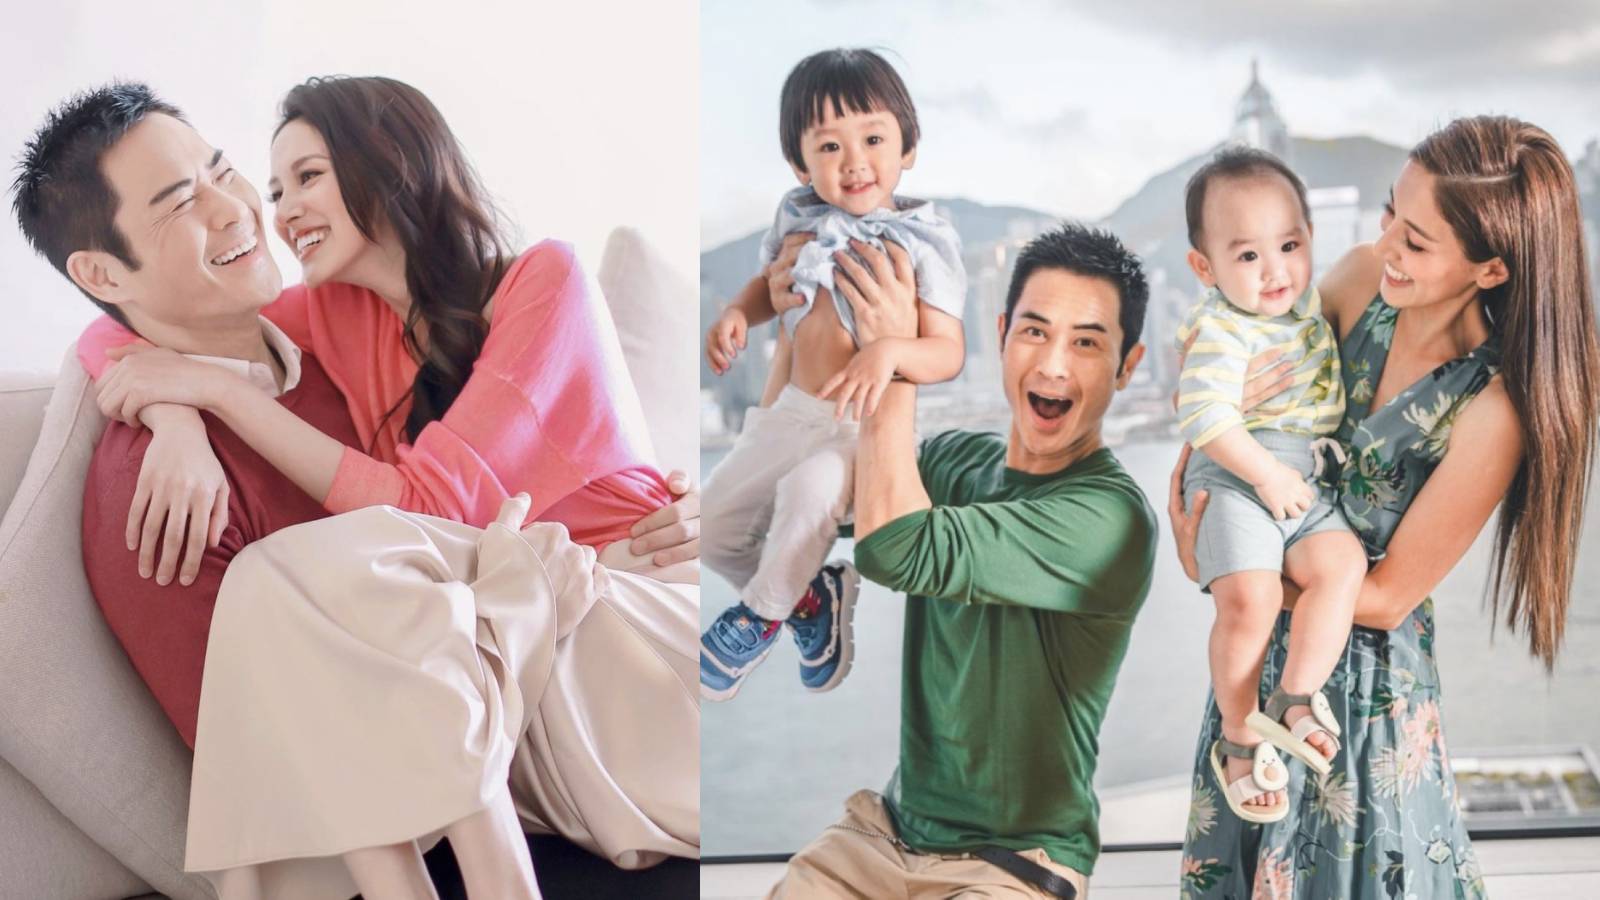 Kevin Cheng Says As Long As His Wife Grace Chan Is Happy, “She Can Do Whatever She Wants To Do"